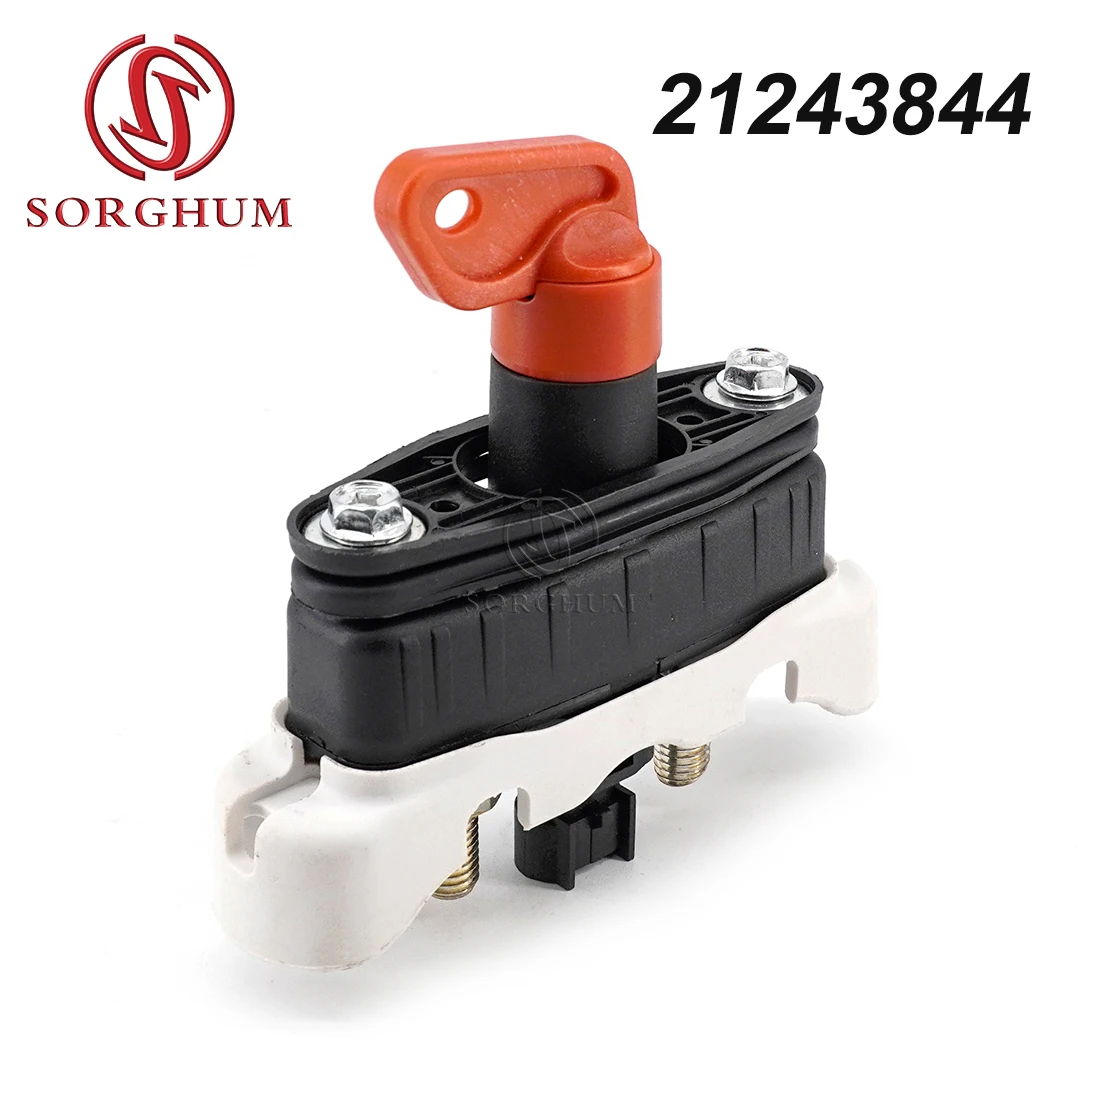 

SORGHUM Battery Main Switch for Volvo FH/FM/VM Truck Chave Geral Bateria Switch OEM 21199003 7421199003 5010480969 21243844